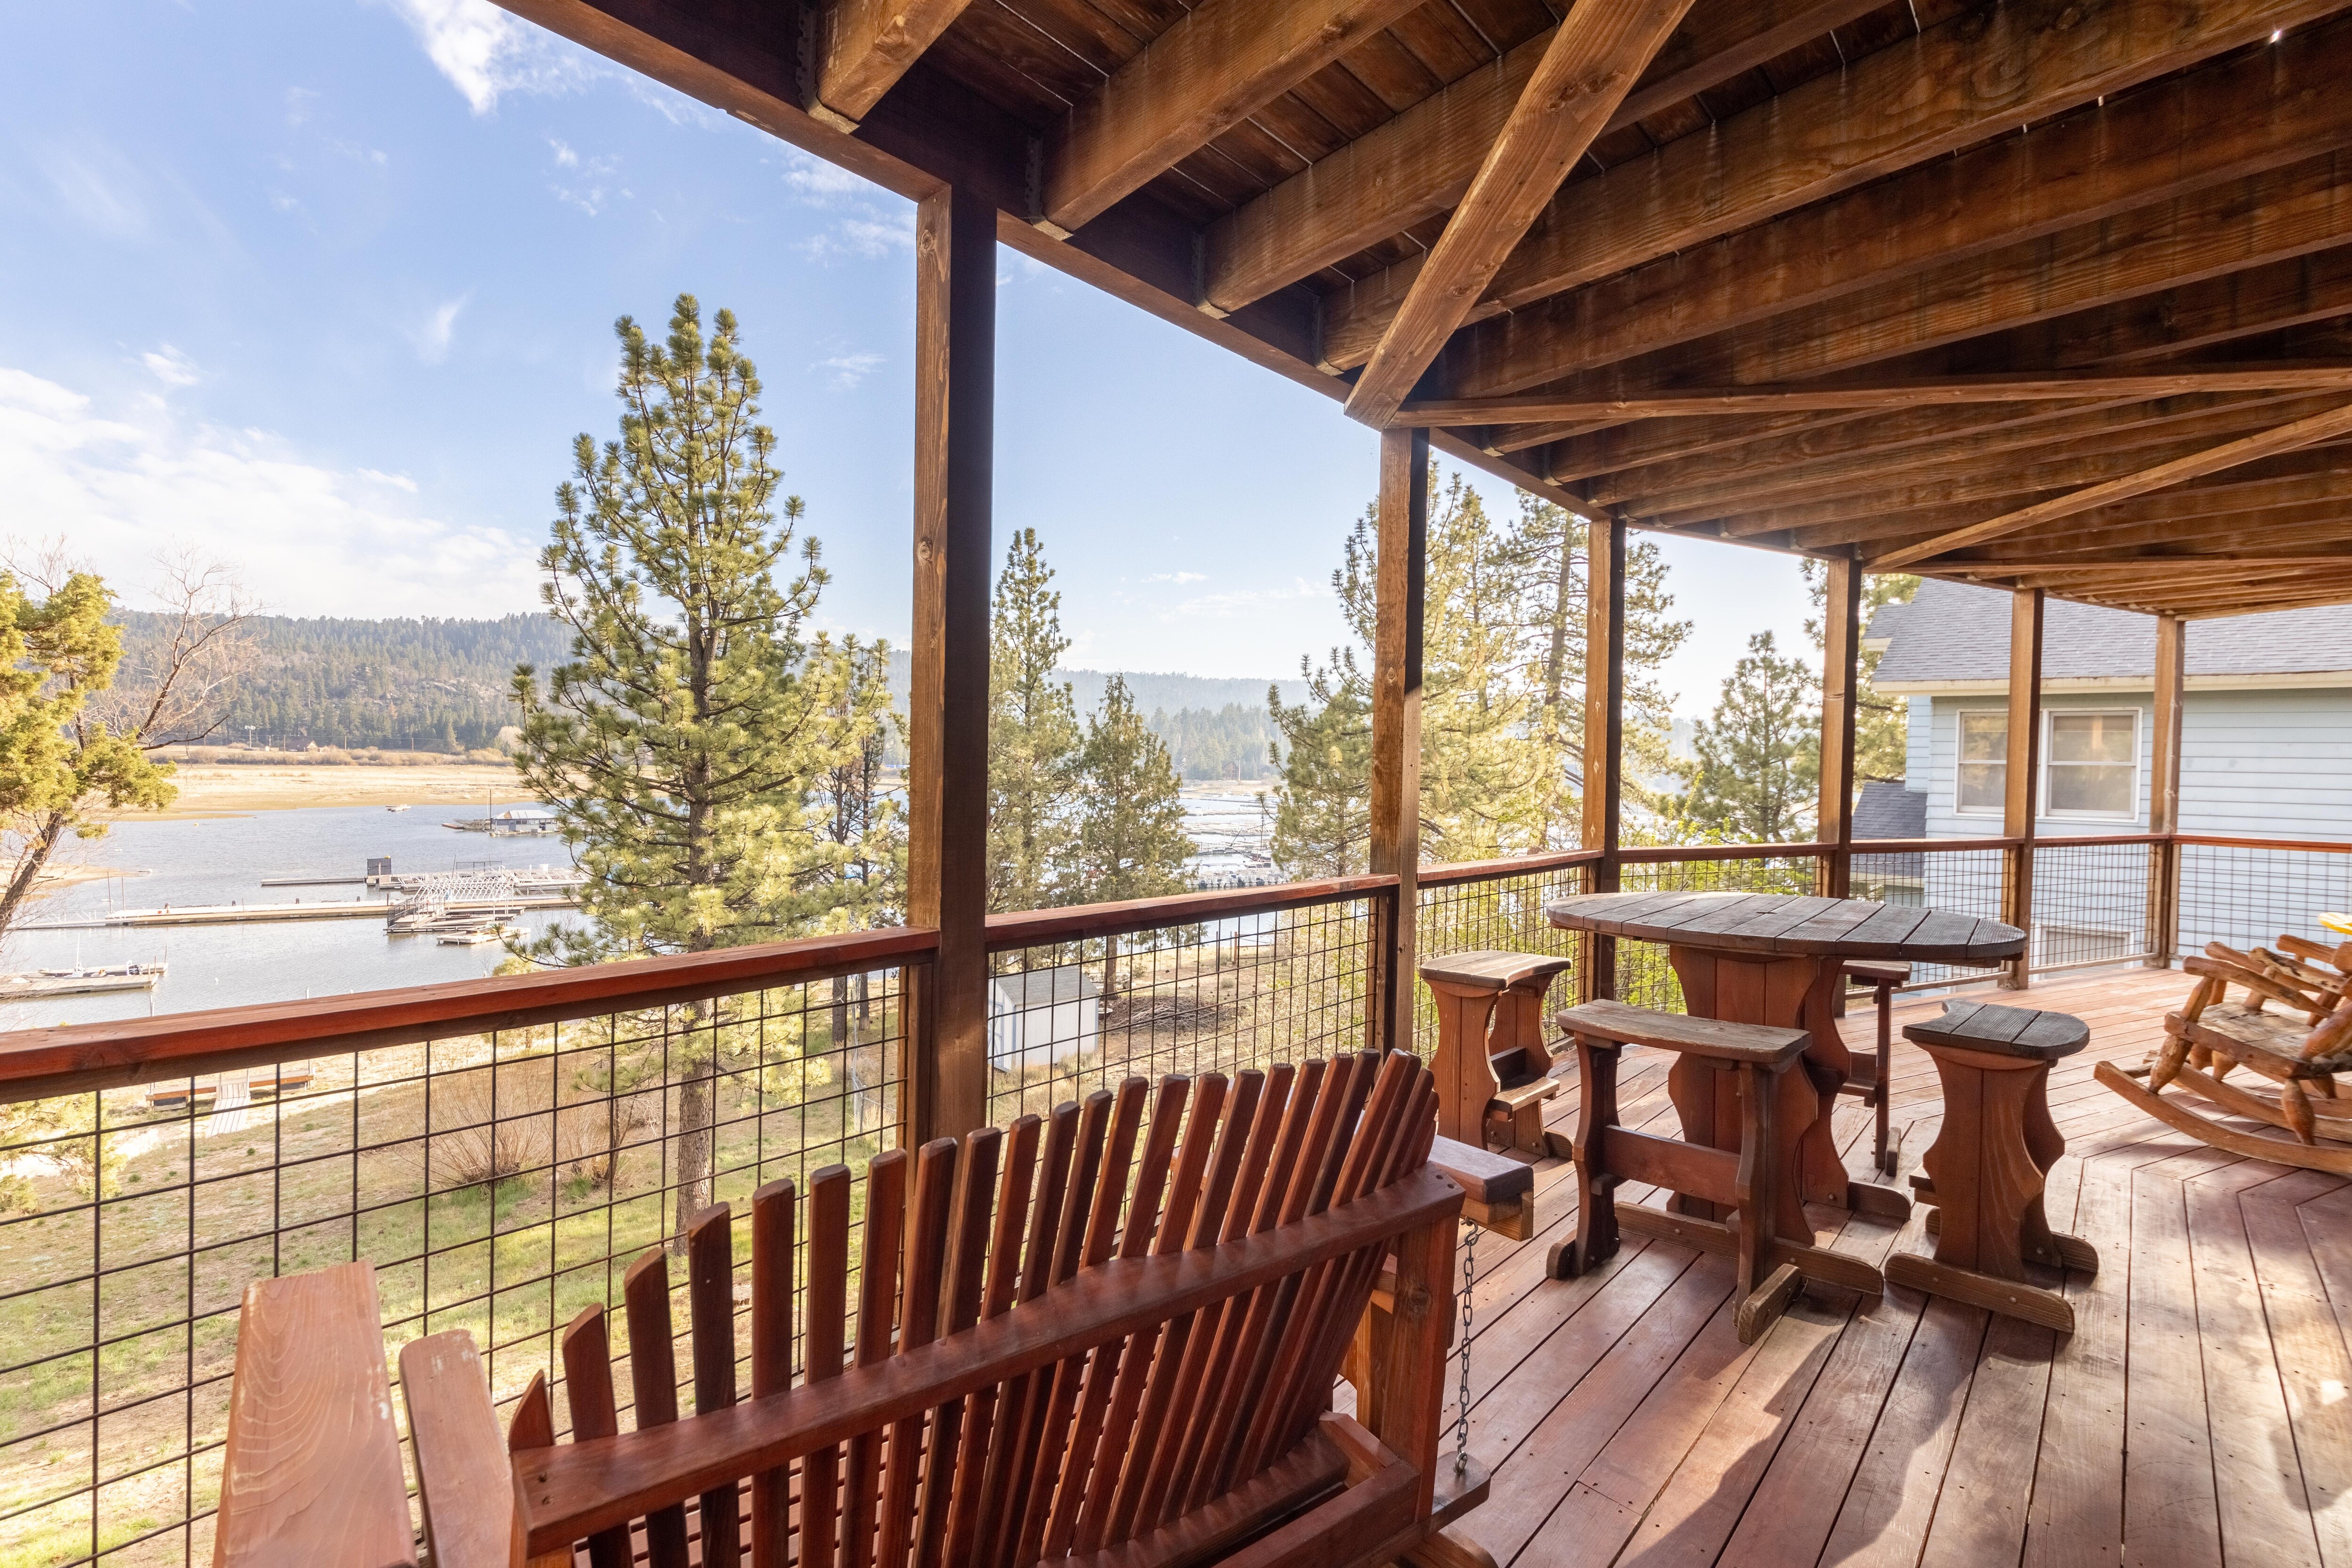 Lake views from the spacious deck.